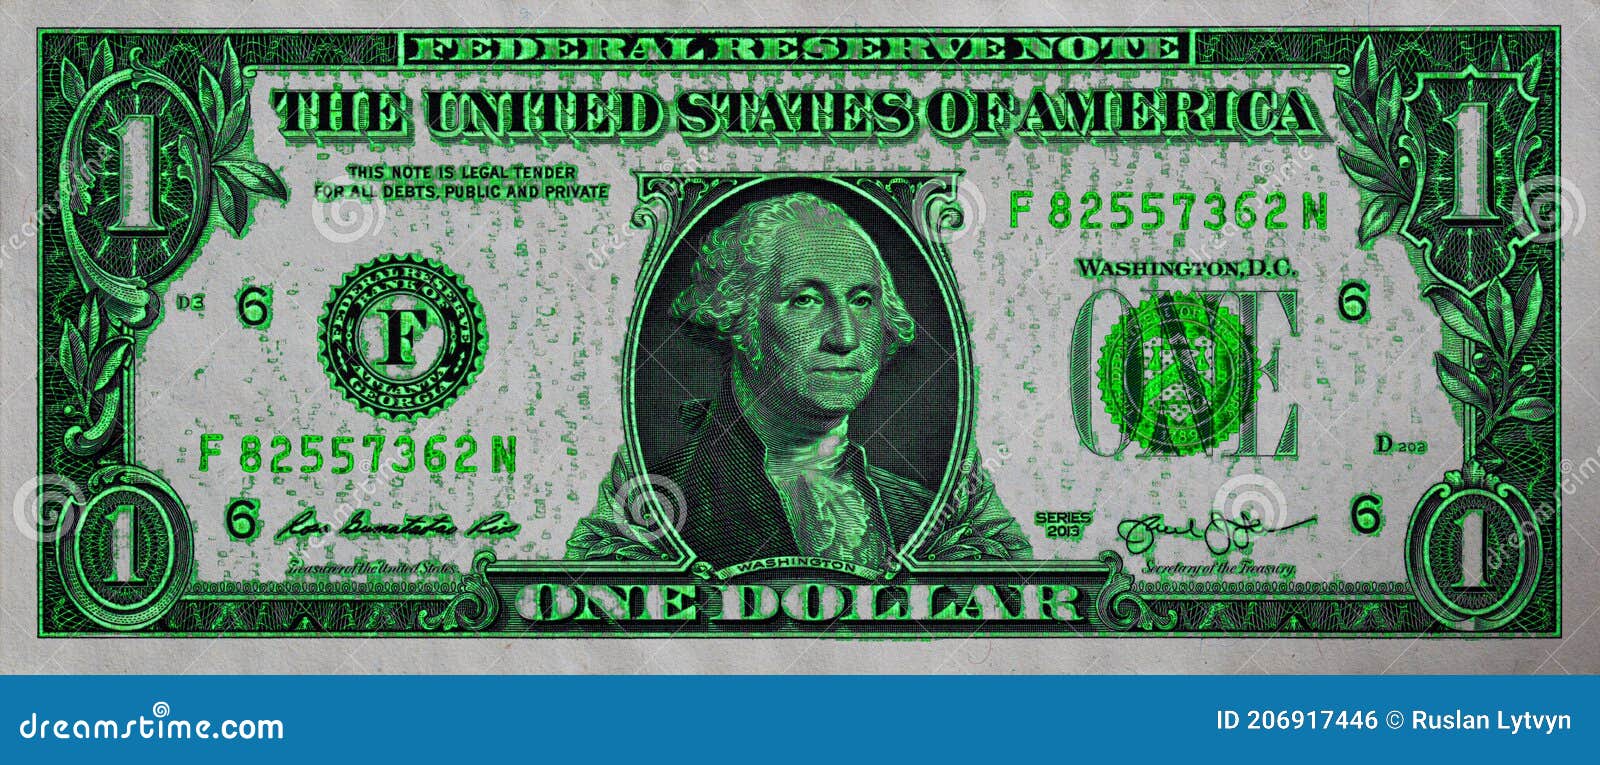 1 u.s. dollar with green glitter backgroundfor